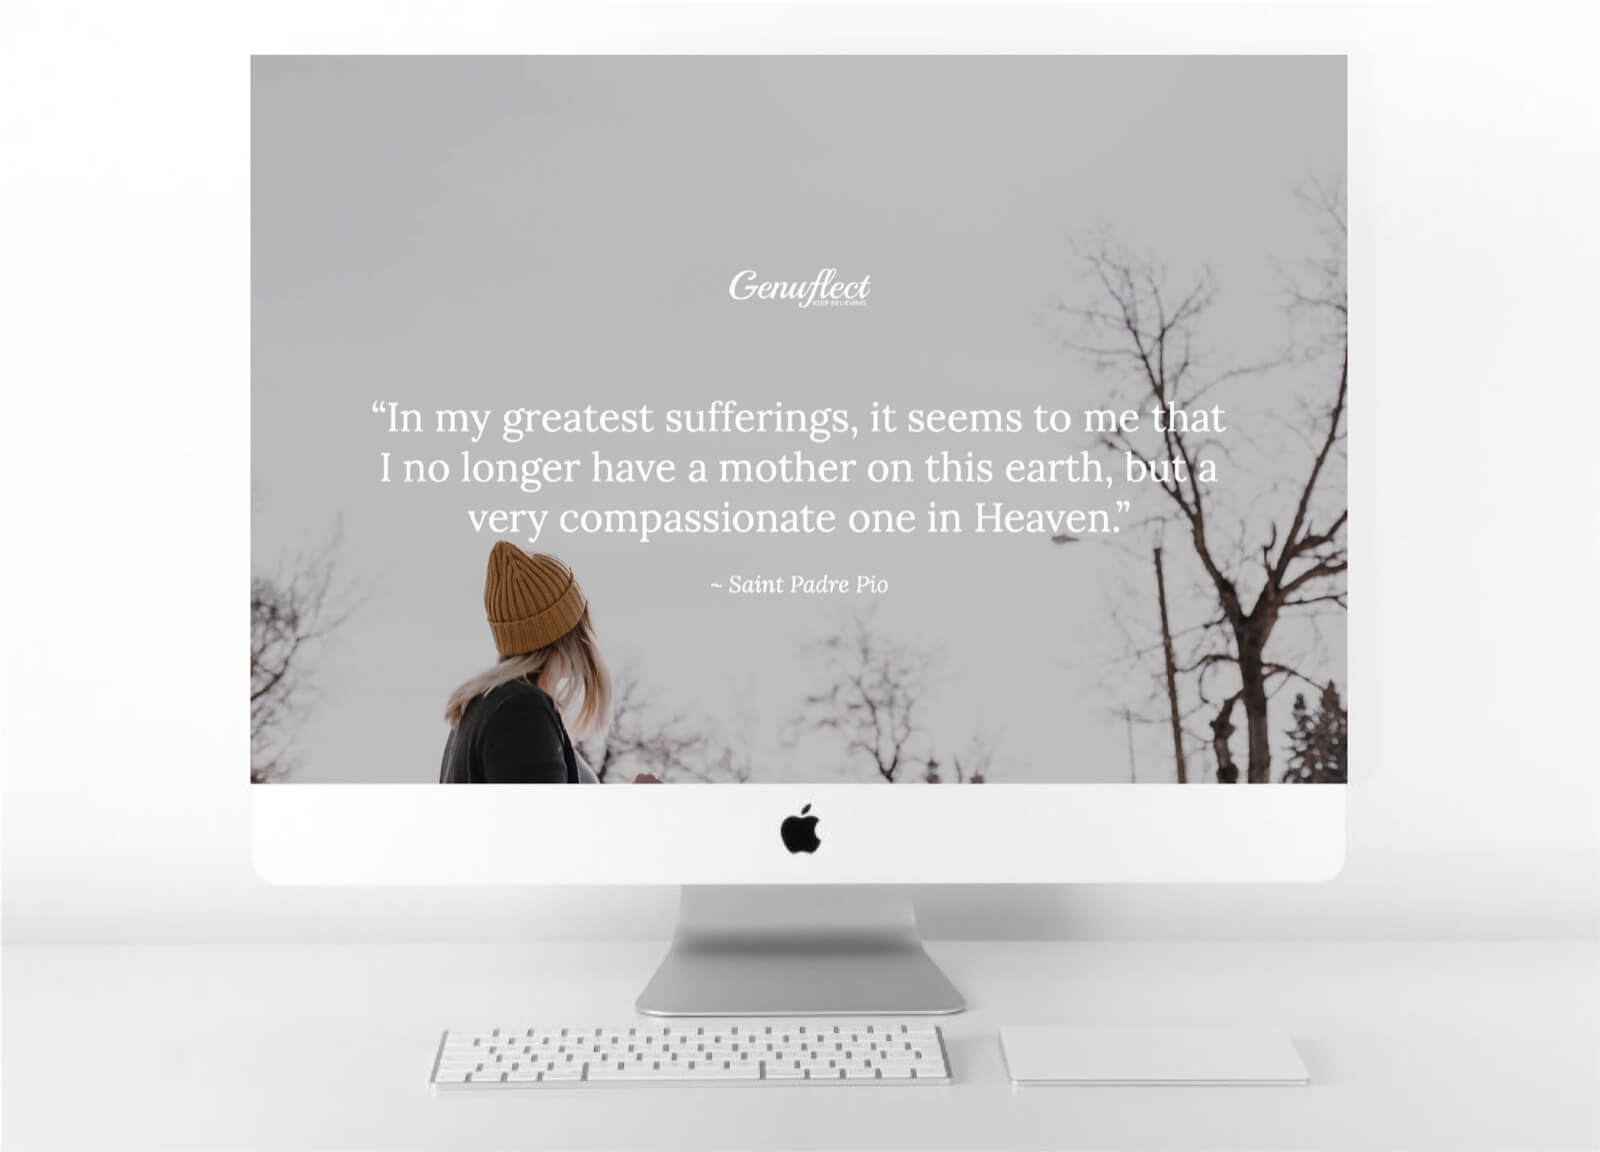 Genuflect - Desktop background image of woman outside in winter looking up to the gray sky